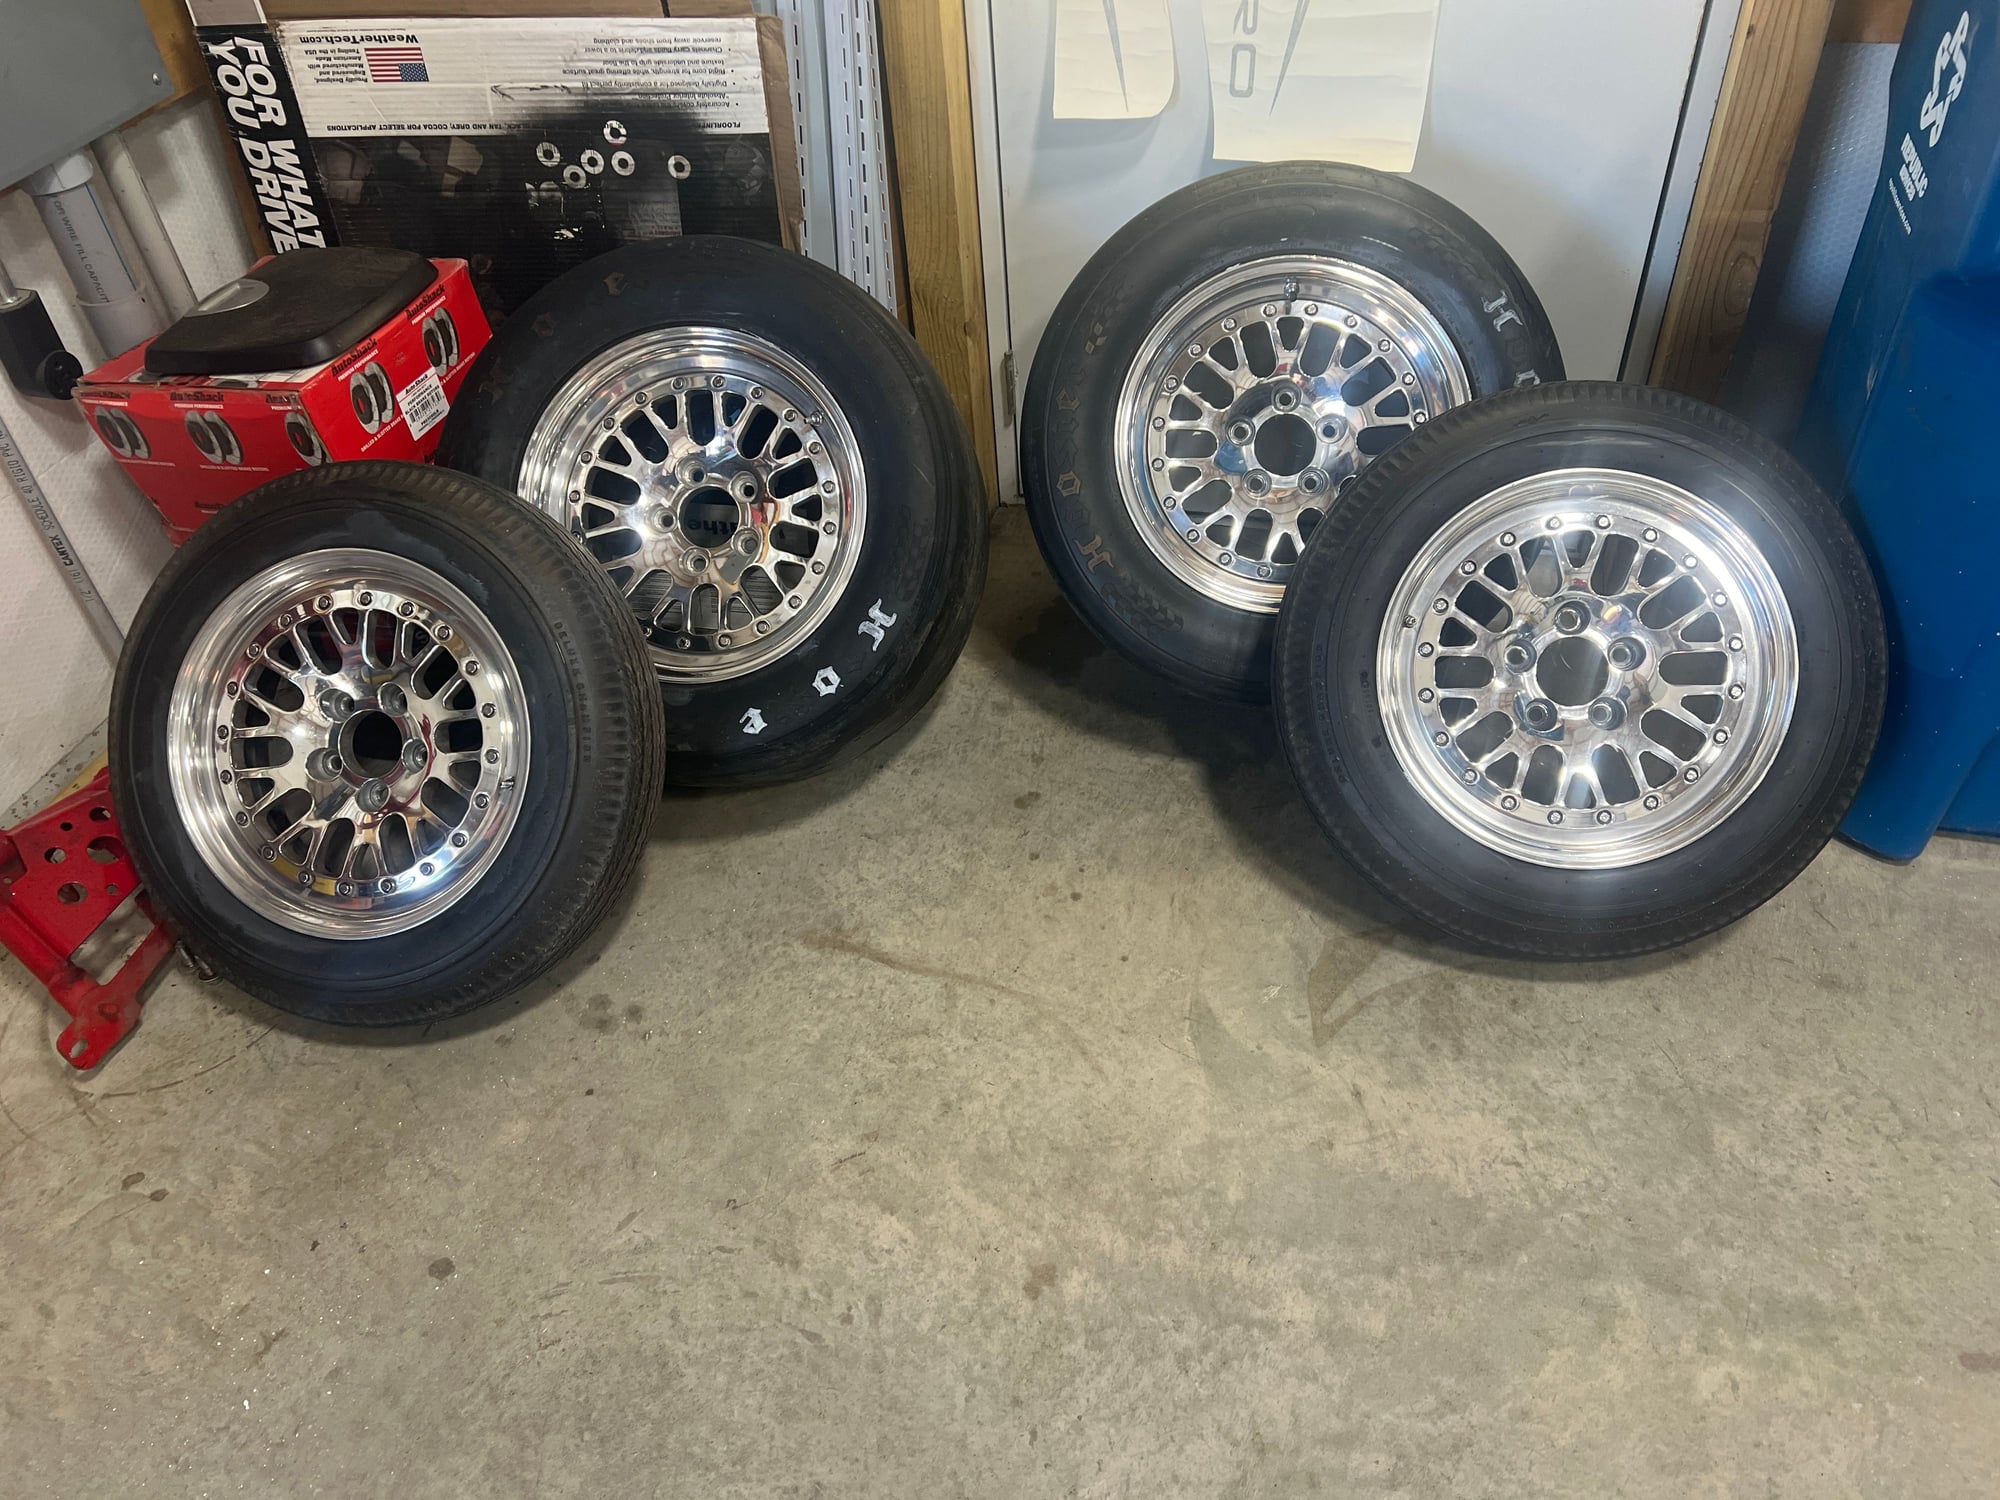 Wheels and Tires/Axles - 16” CCW classics drag pack - Used - Owensboro, KY 42301, United States